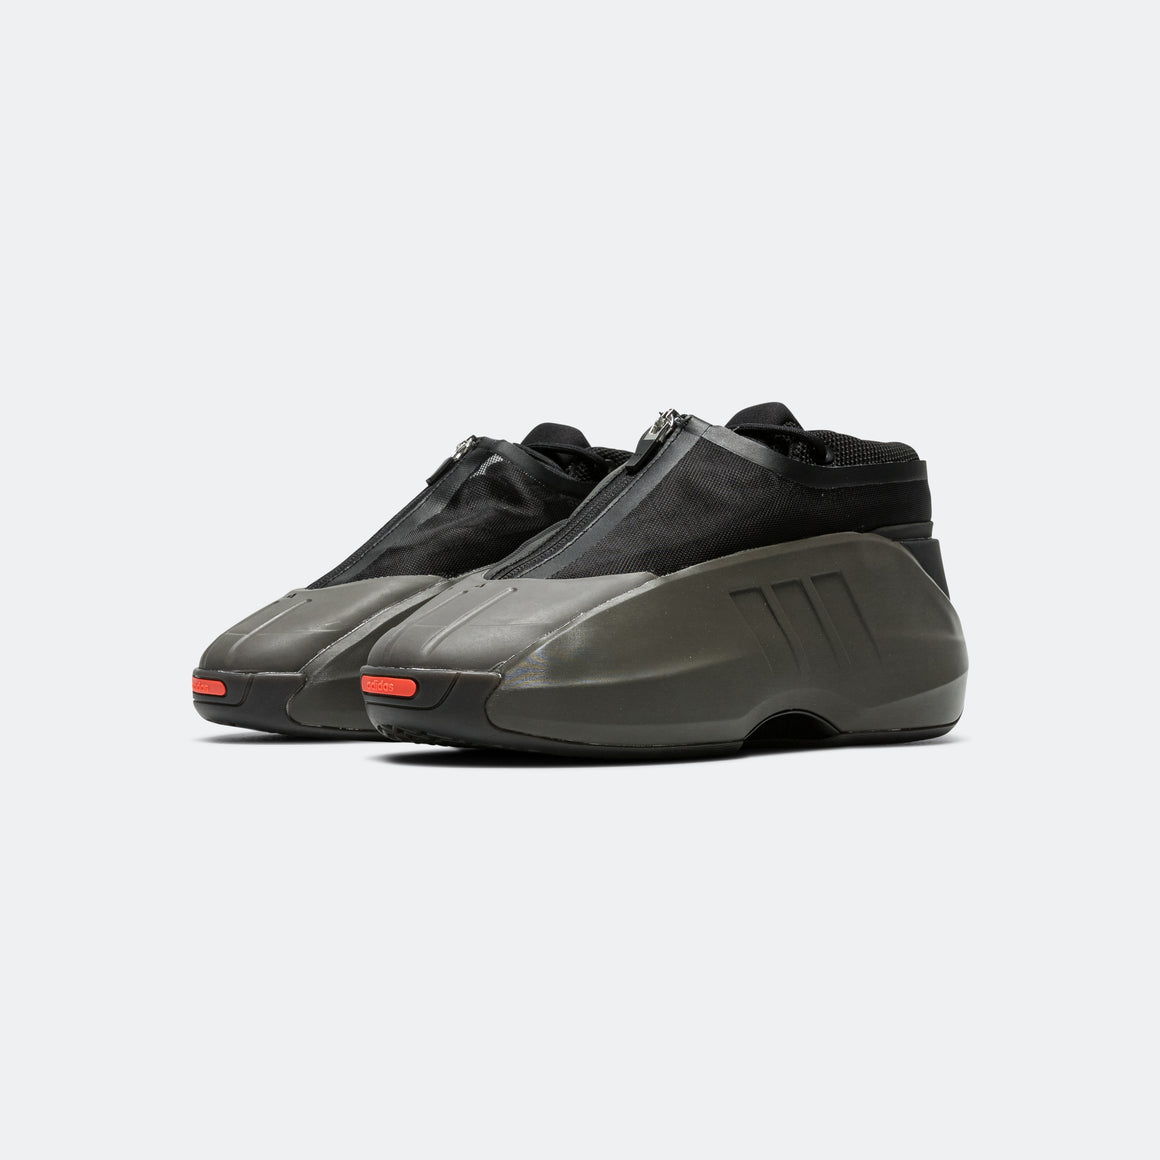 adidas - Crazy IIINFINITY - Charcoal/Core Black-Solar Red - UP THERE